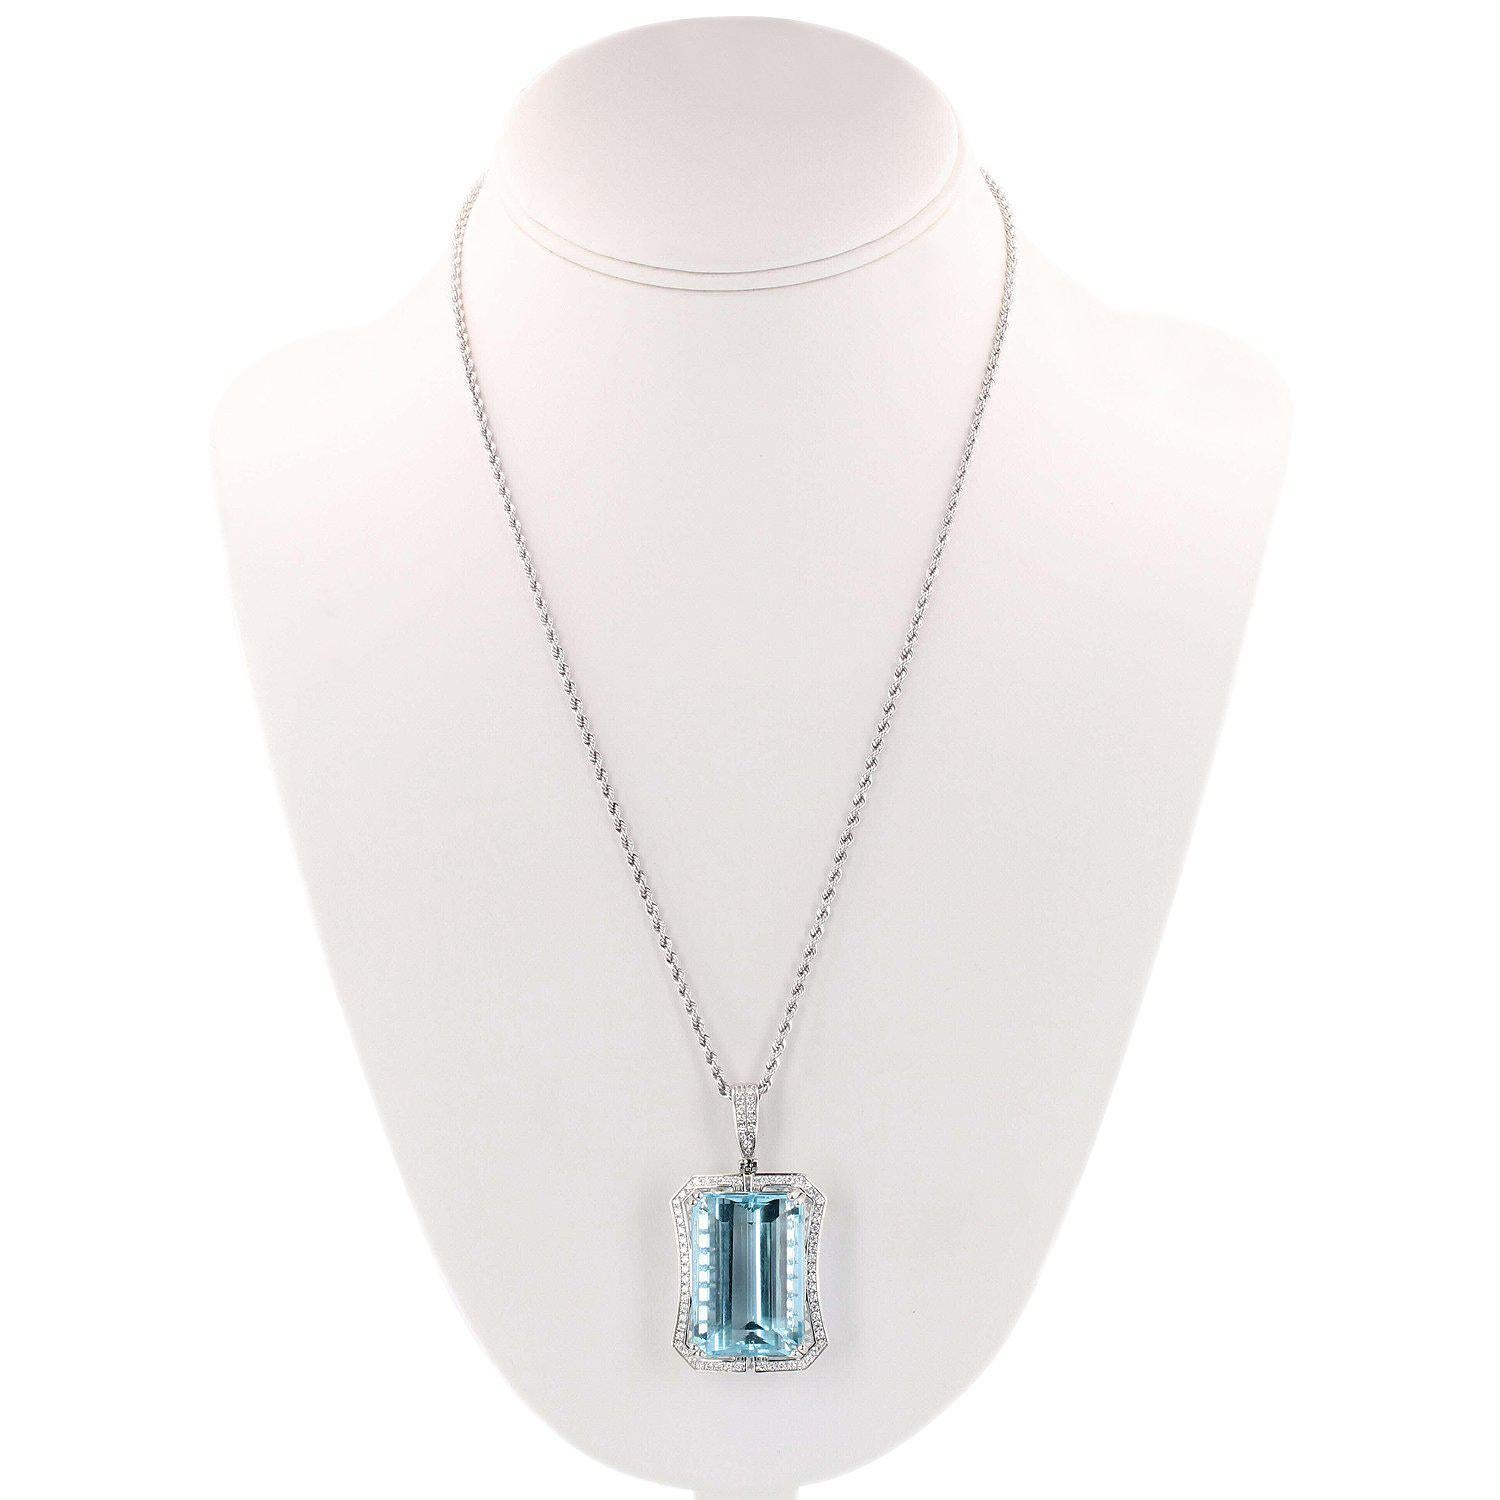 One electronically tested platinum ladies cast & assembled aquamarine and diamond pendant with chain. Condition is new, good workmanship. The pendant features an aquamarine set within a stylized diamond bezel, completed by a hinged diamond set bail.